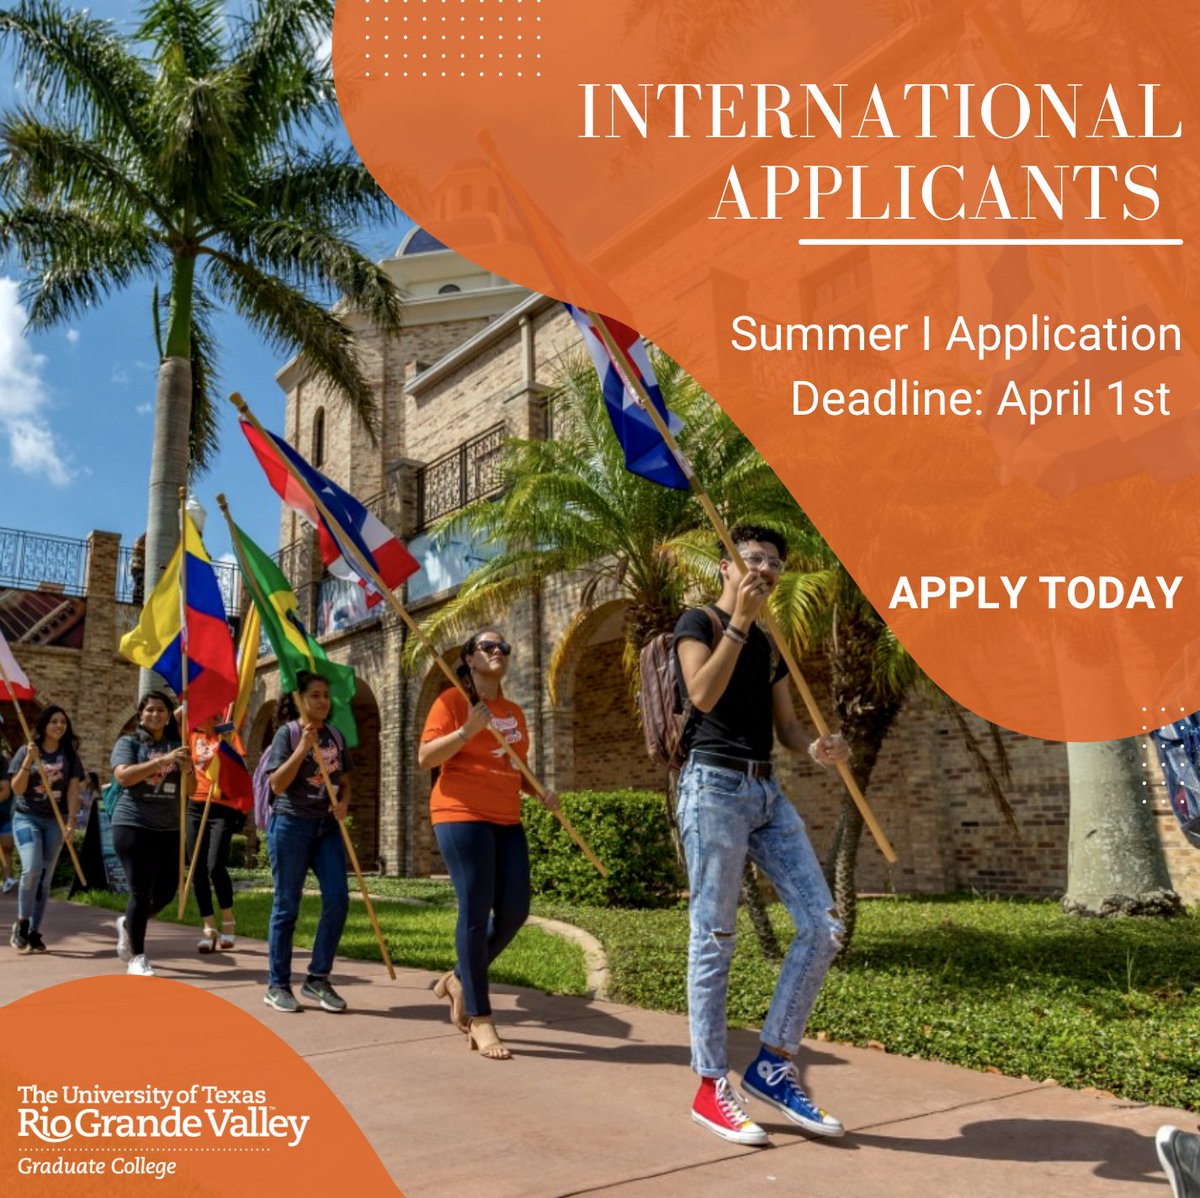 Calling all international applicants 📣 Summer I Application deadline for most programs is approaching, submit your application by April 1st! Apply today: utrgv.edu/gradapply